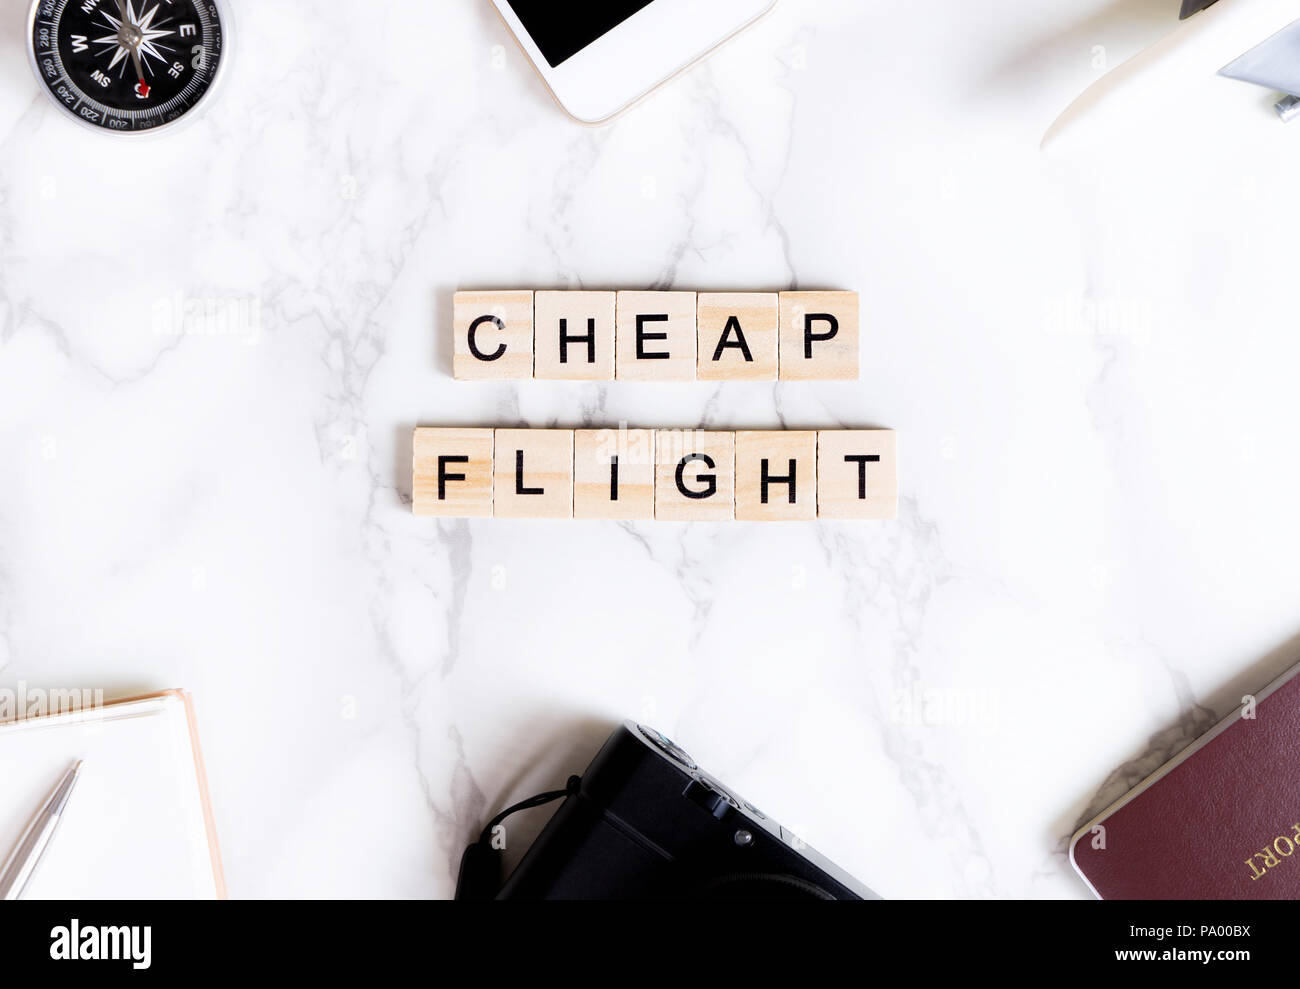 Cheap flight travel text poster for travel agency Stock Photo